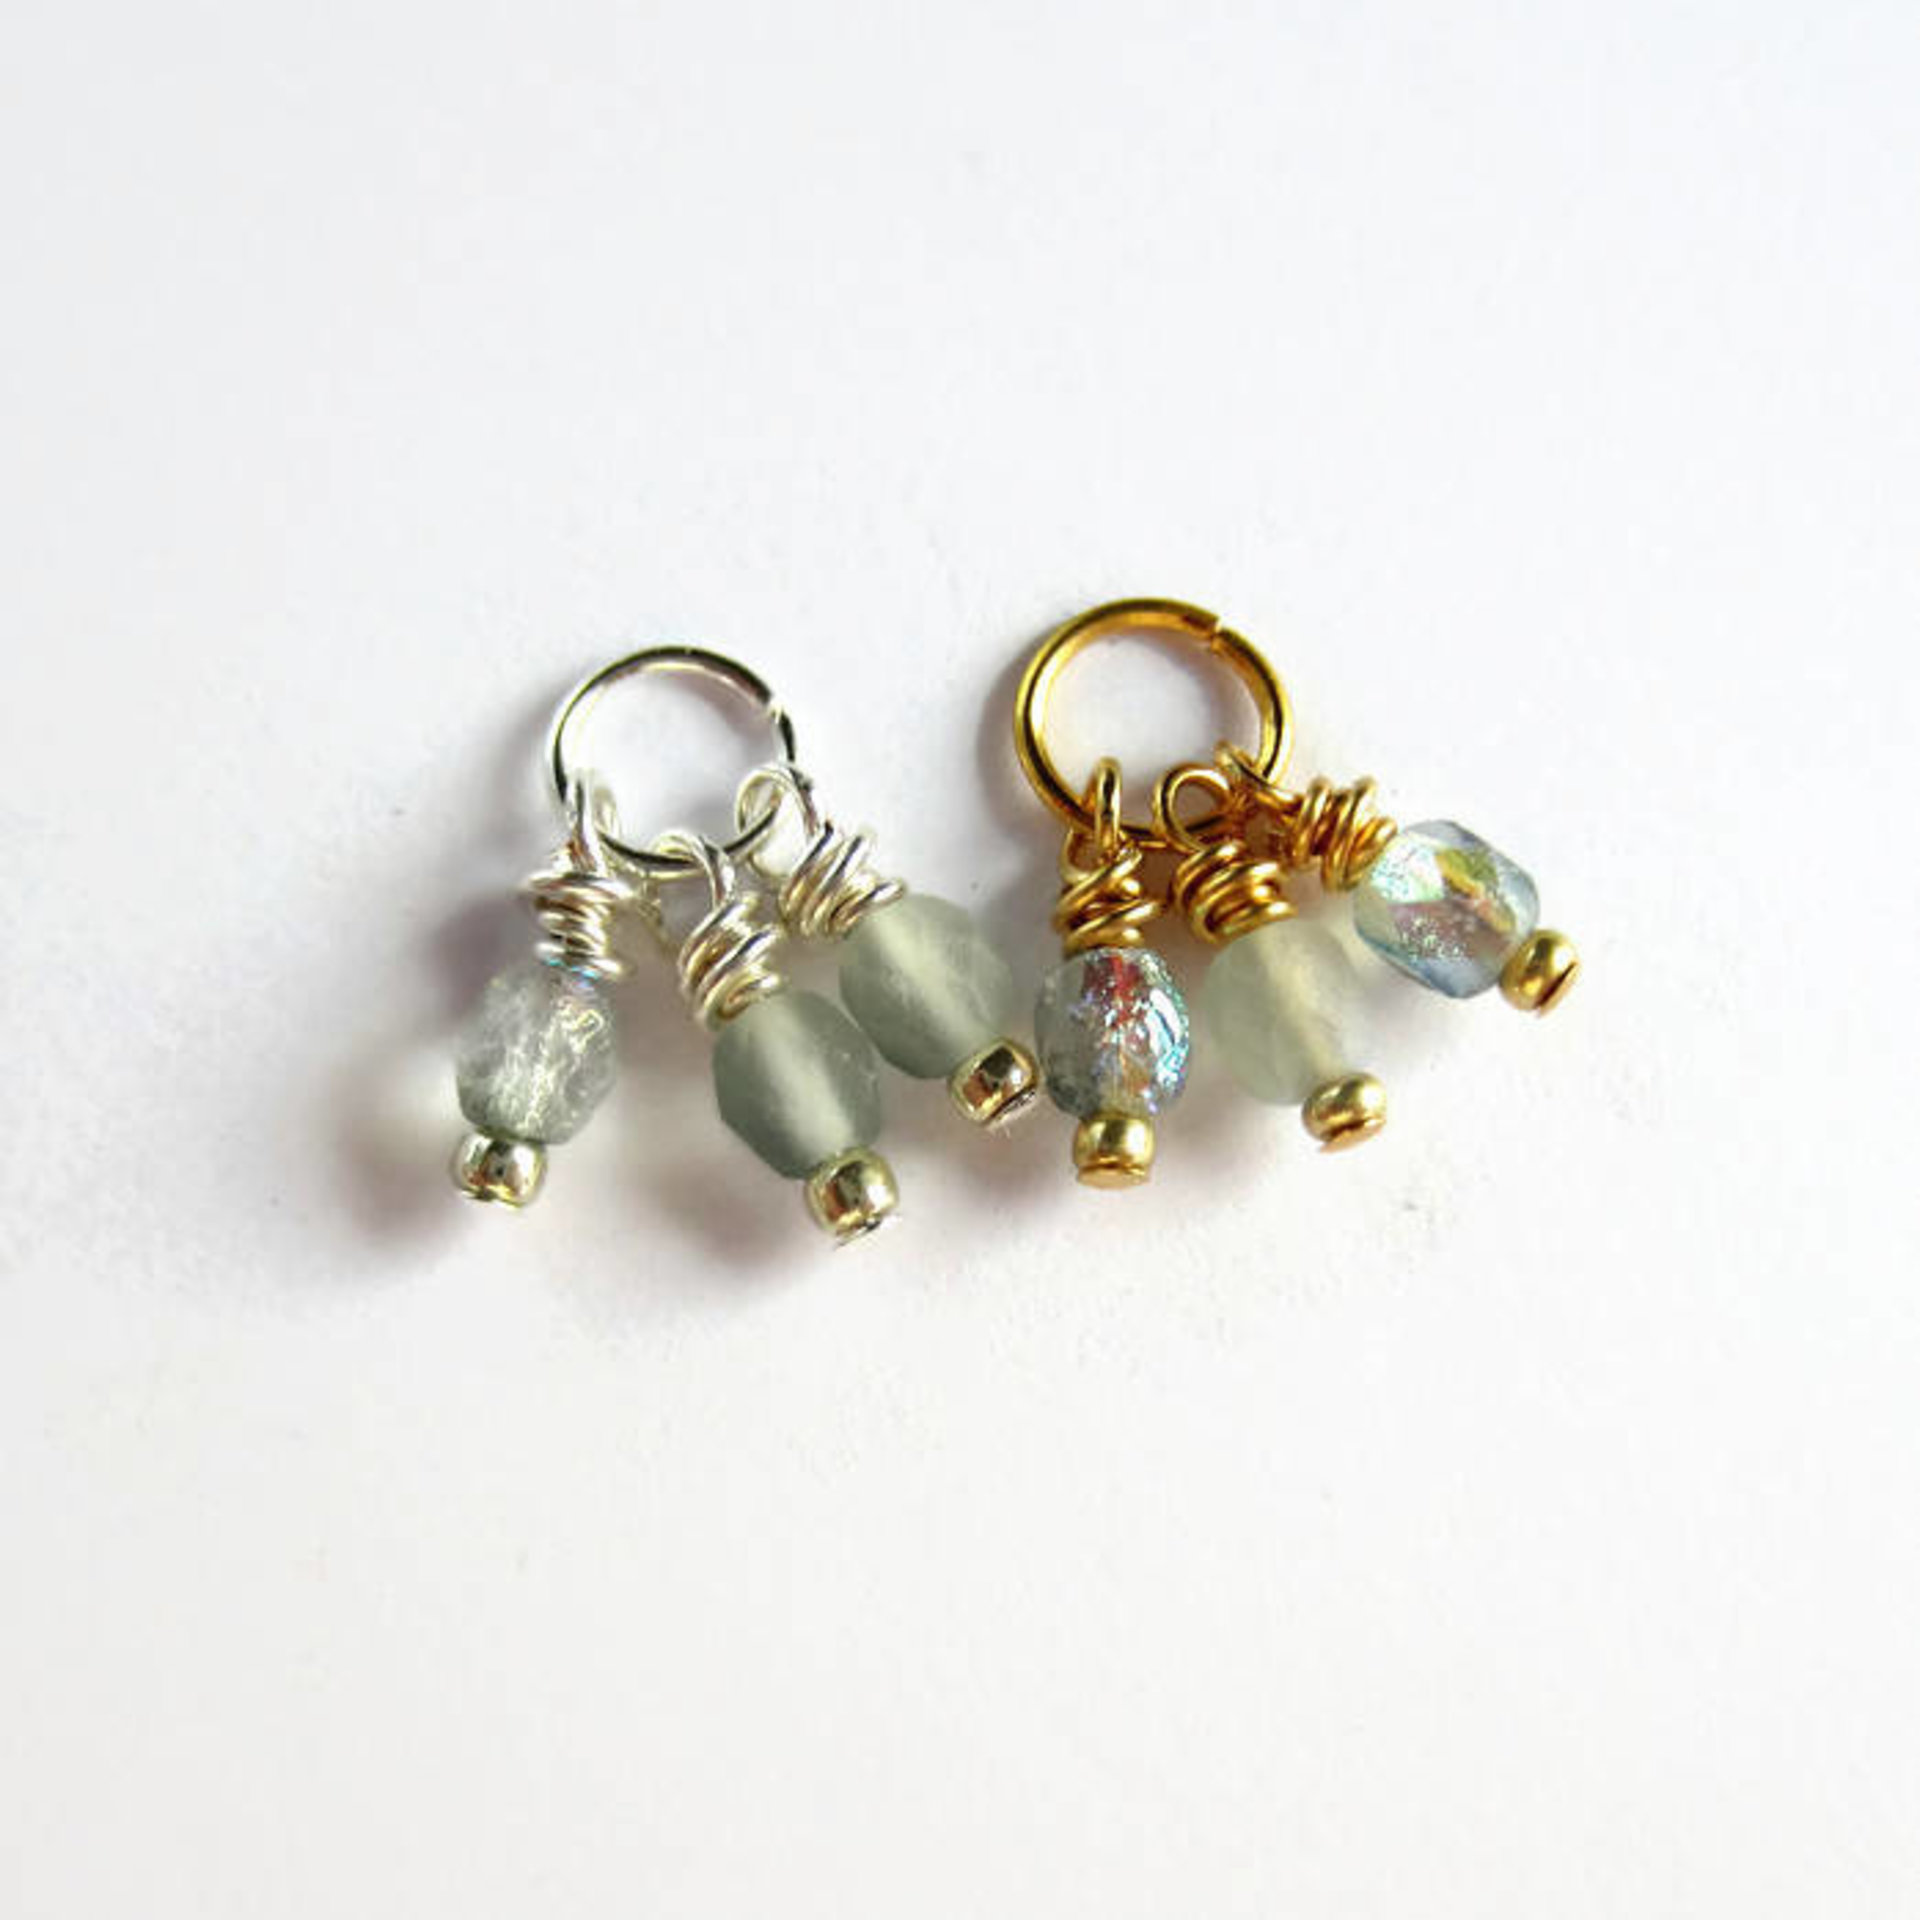 Frosted Crystal Czech Glass Triple Cluster Charm ~ Handmade by The Tiny Tree Frog Jewellery